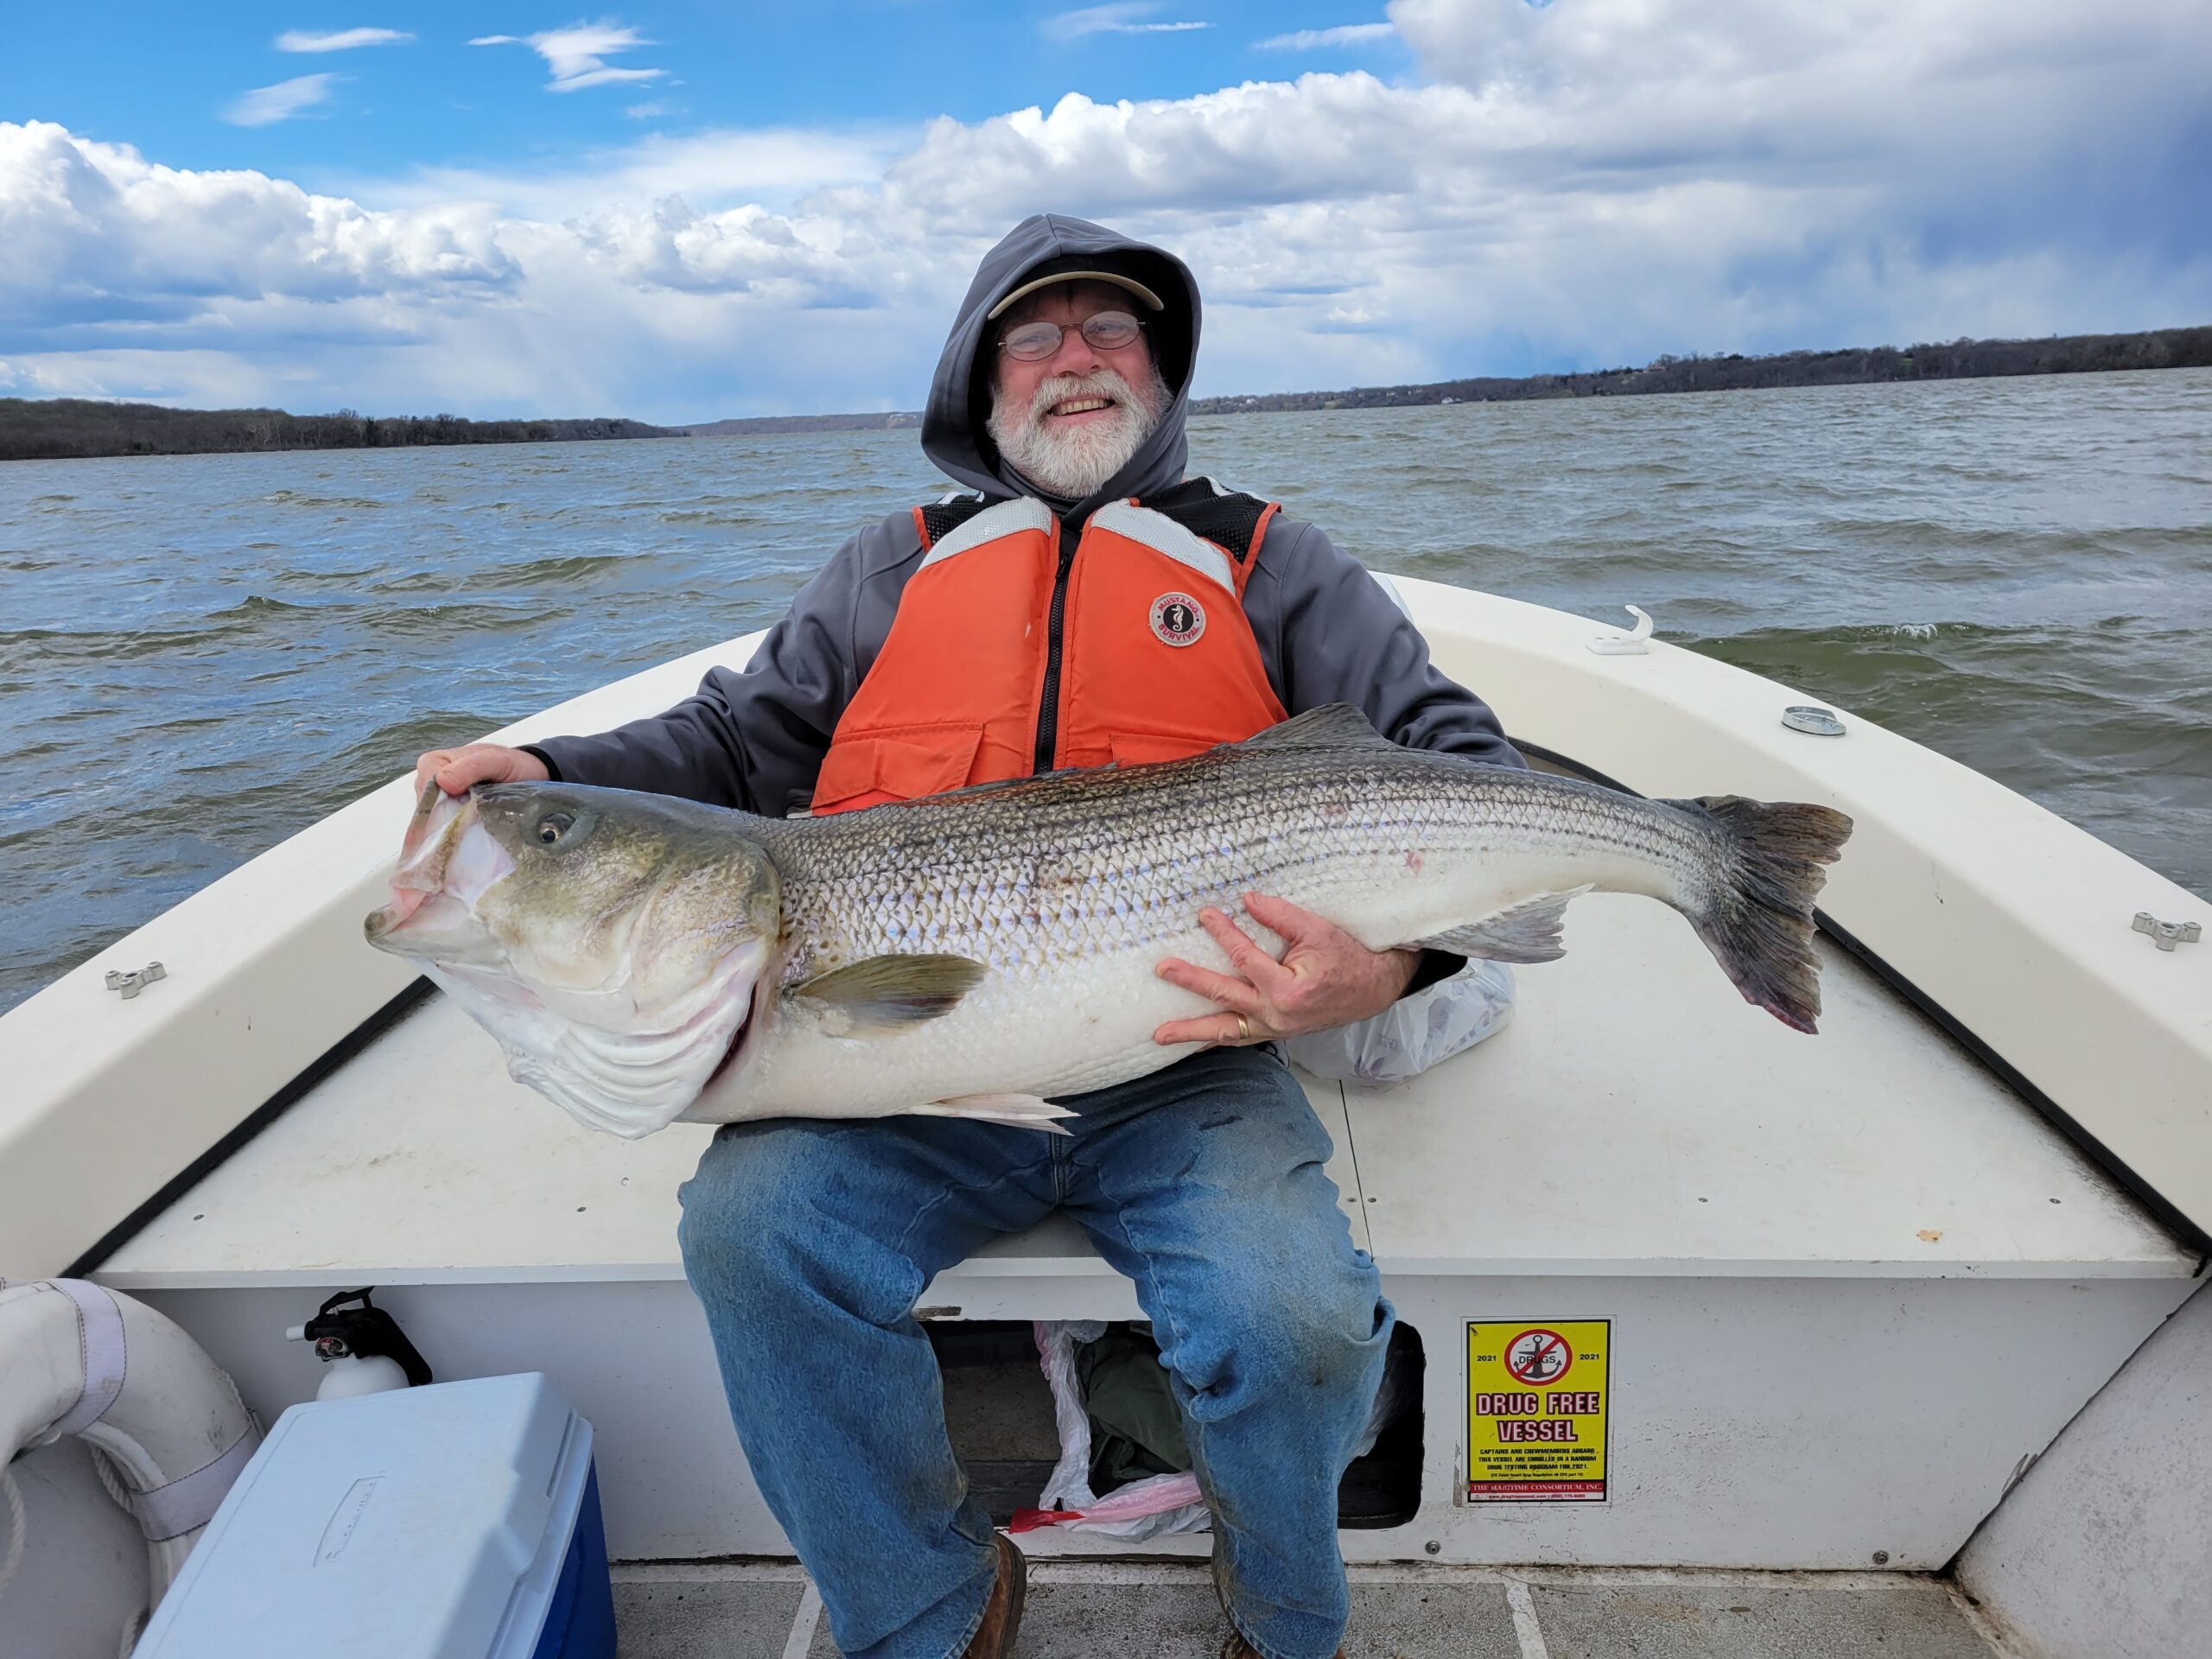 https://indianheadcharters.com/wp-content/uploads/2022/03/Gary-with-monster-striper-scaled.jpg